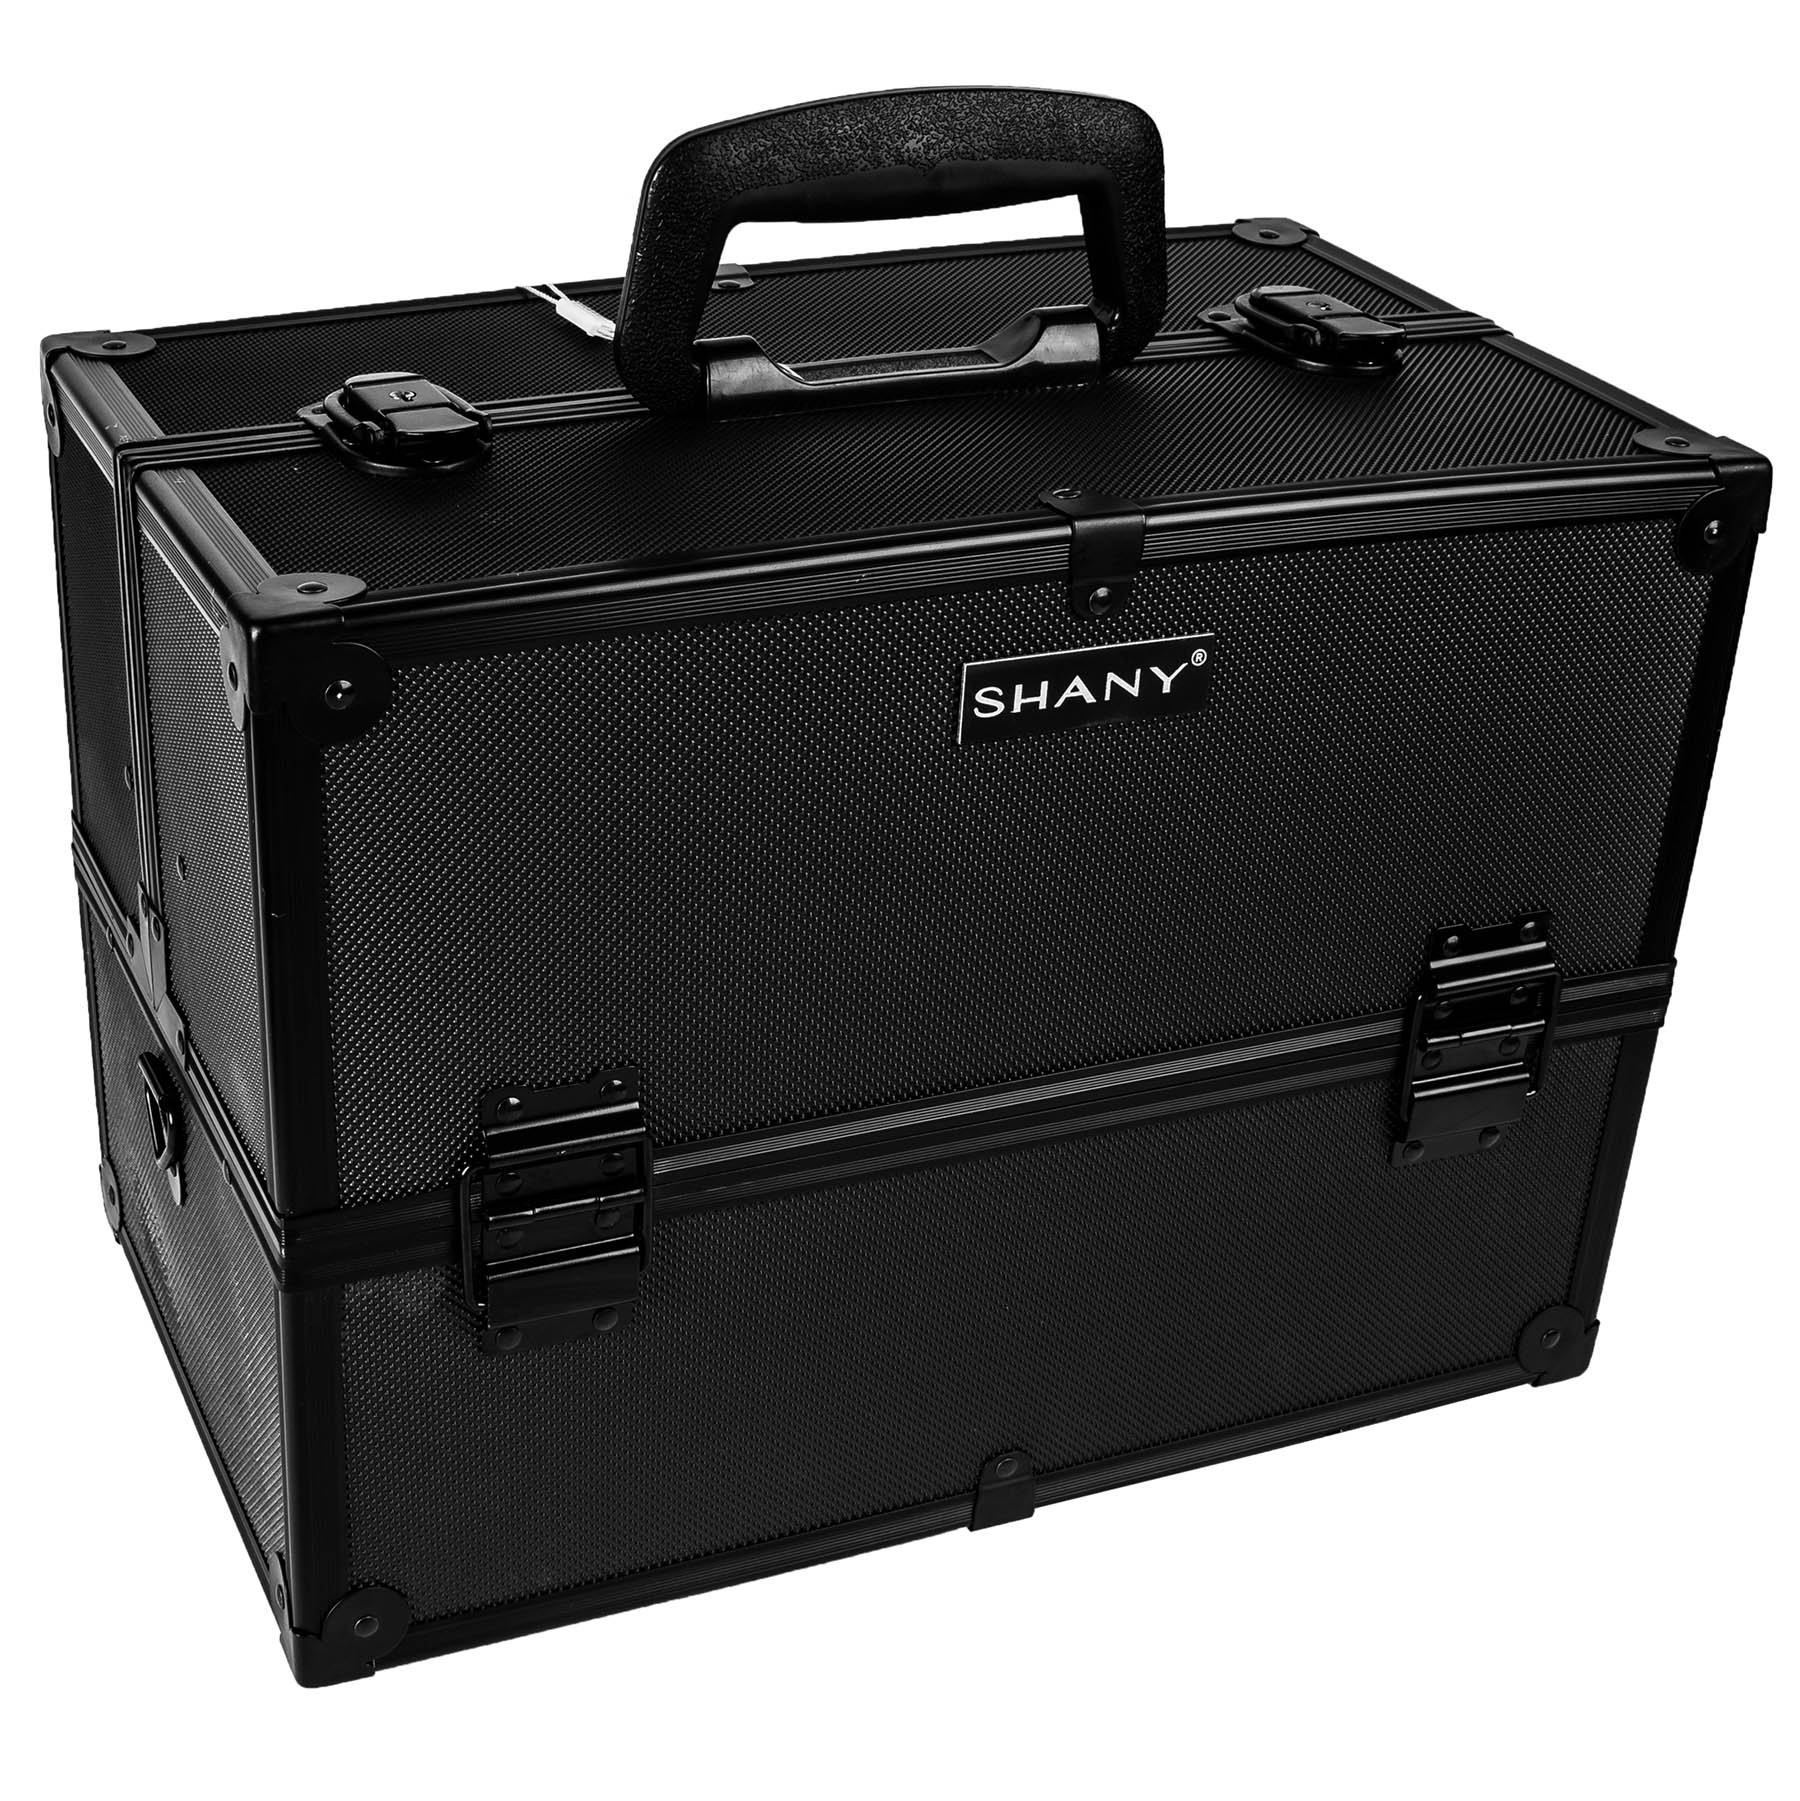 SHANY Essential Pro Makeup Train Case with Shoulder Strap and Locks - Black On Black